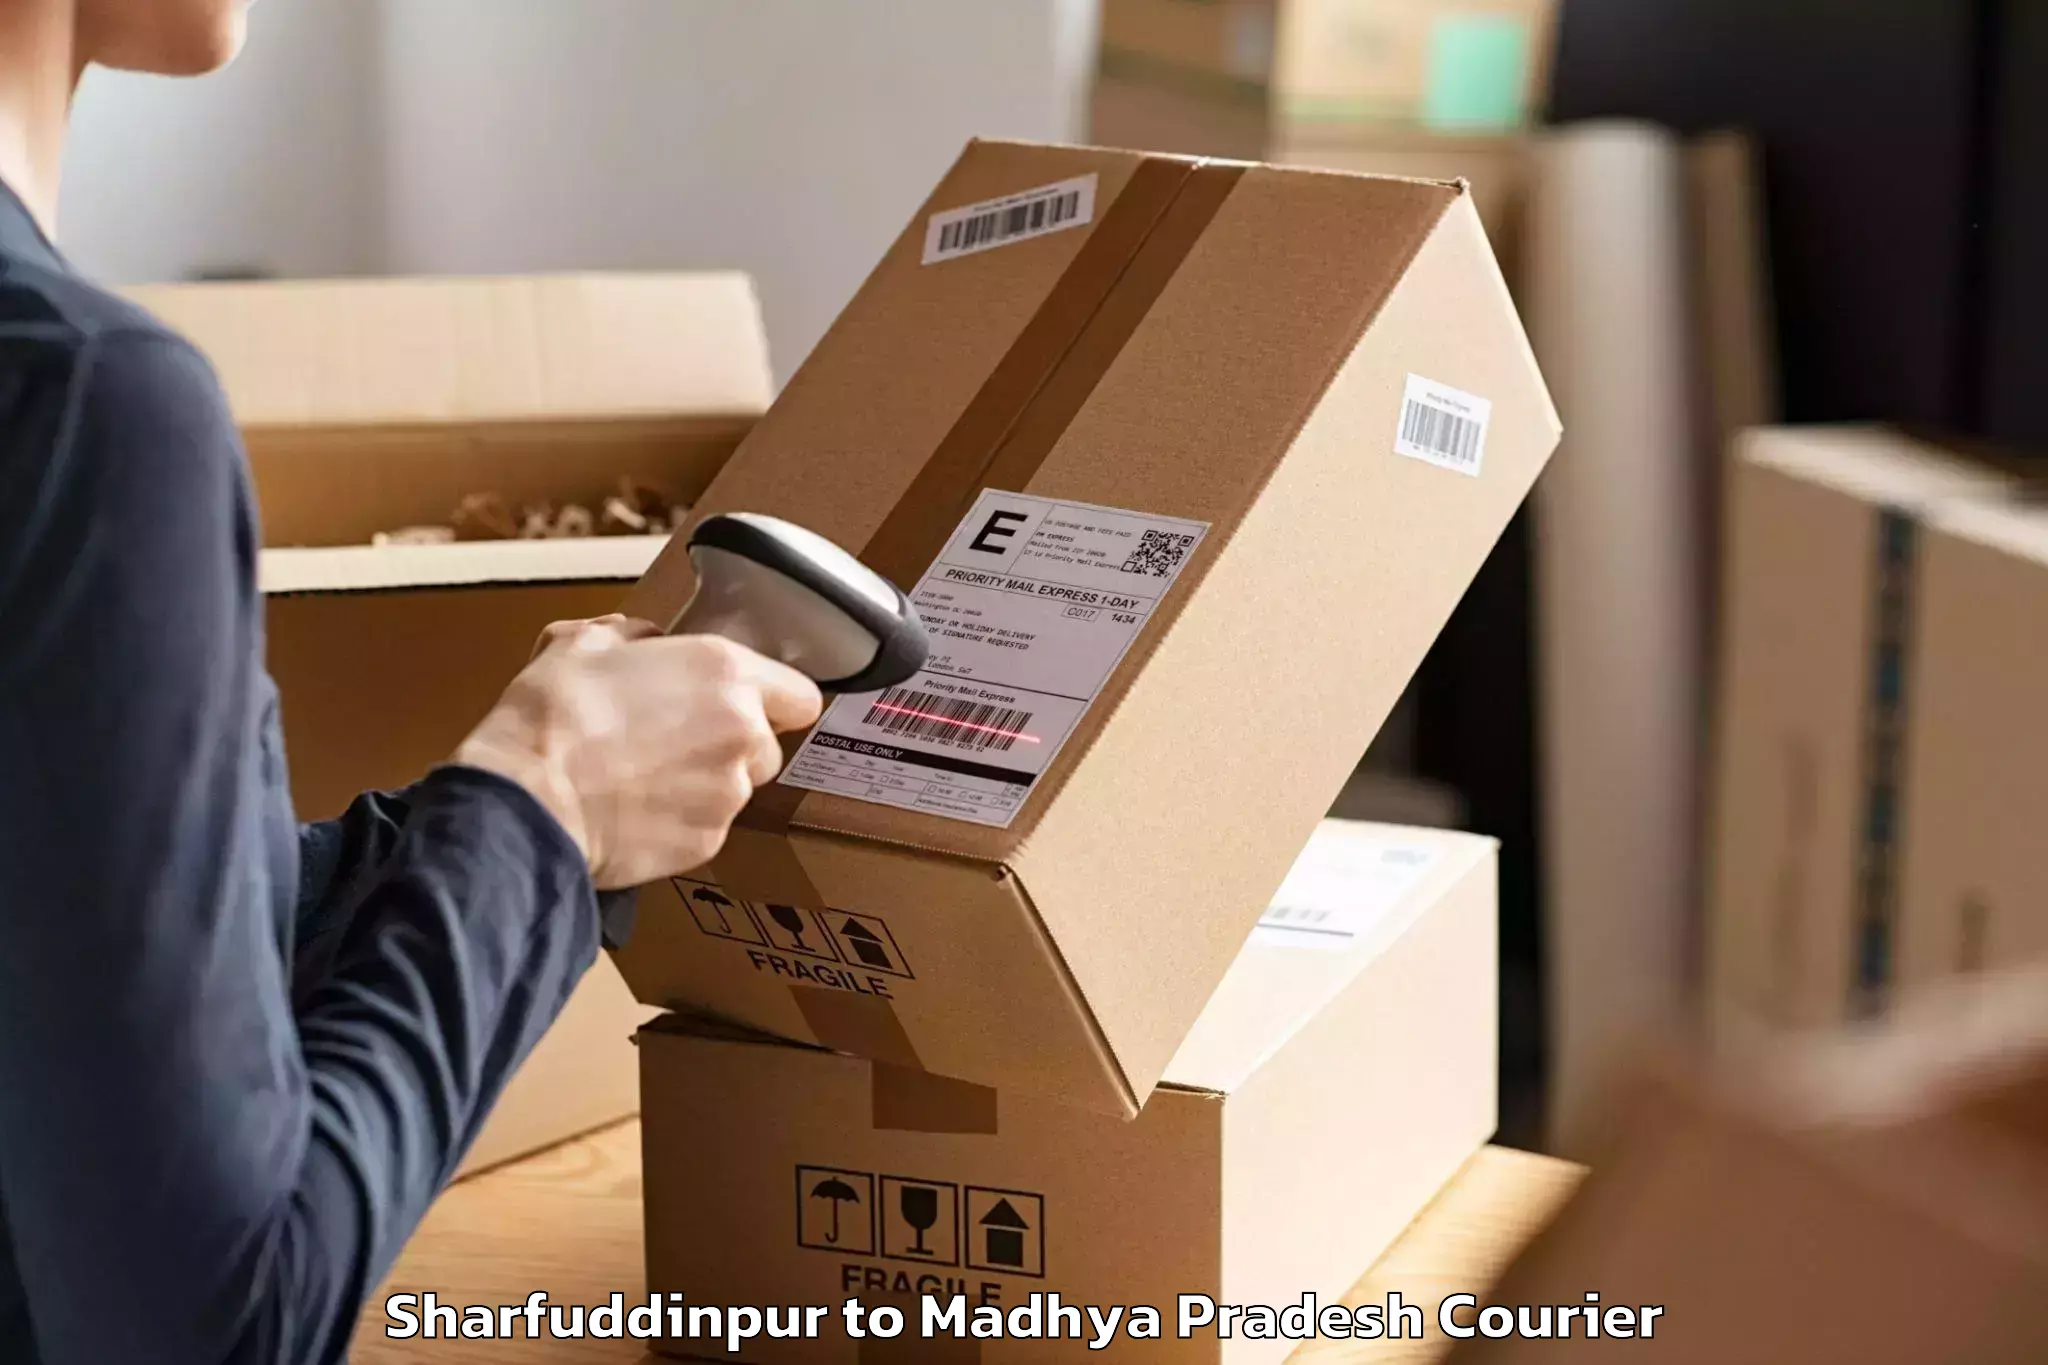 Professional packing and transport in Sharfuddinpur to Katni